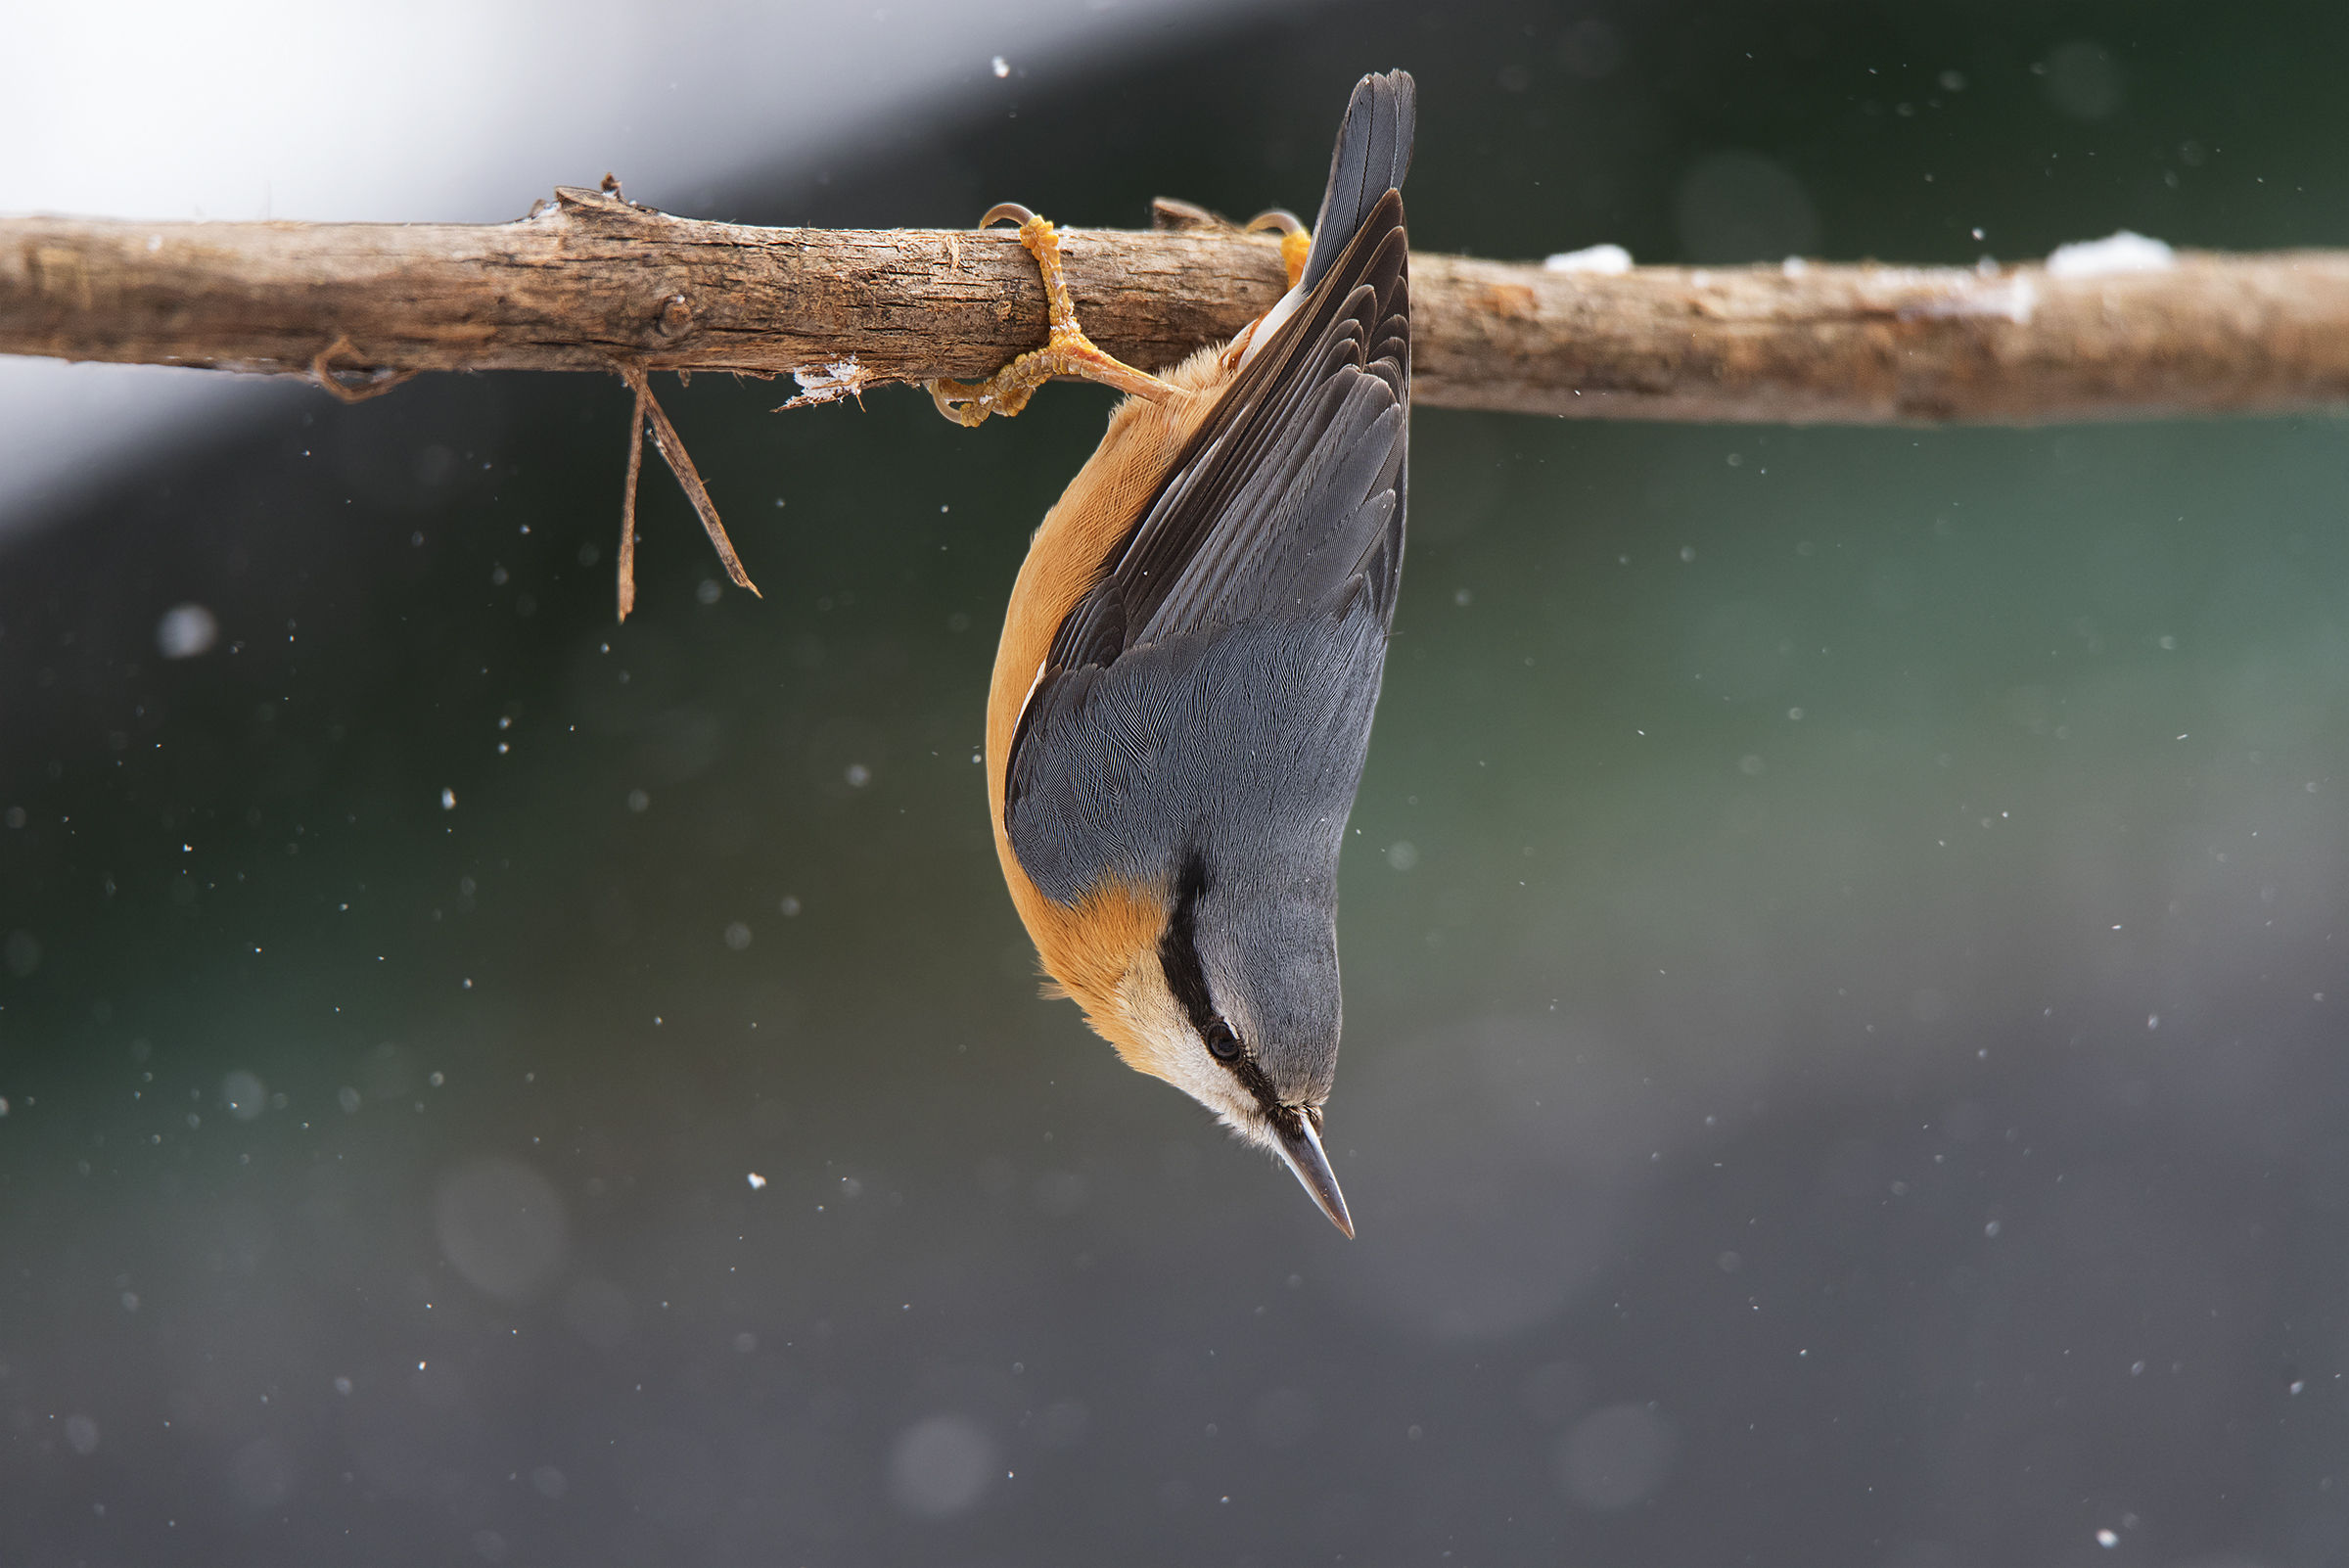 Hanging under the snowfall...